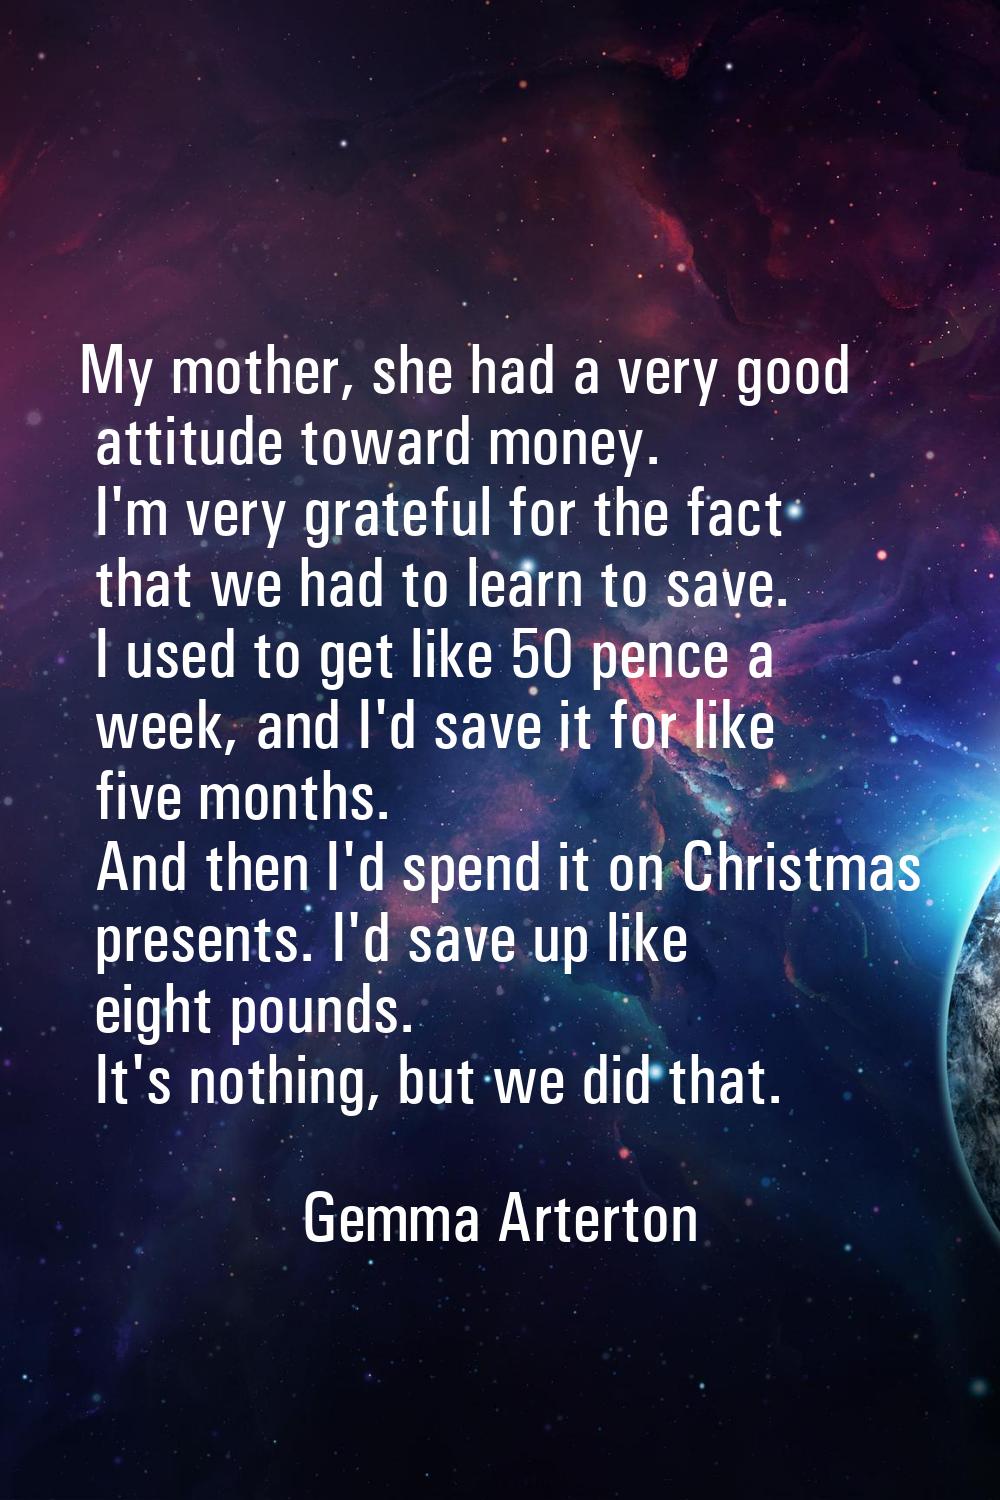 My mother, she had a very good attitude toward money. I'm very grateful for the fact that we had to